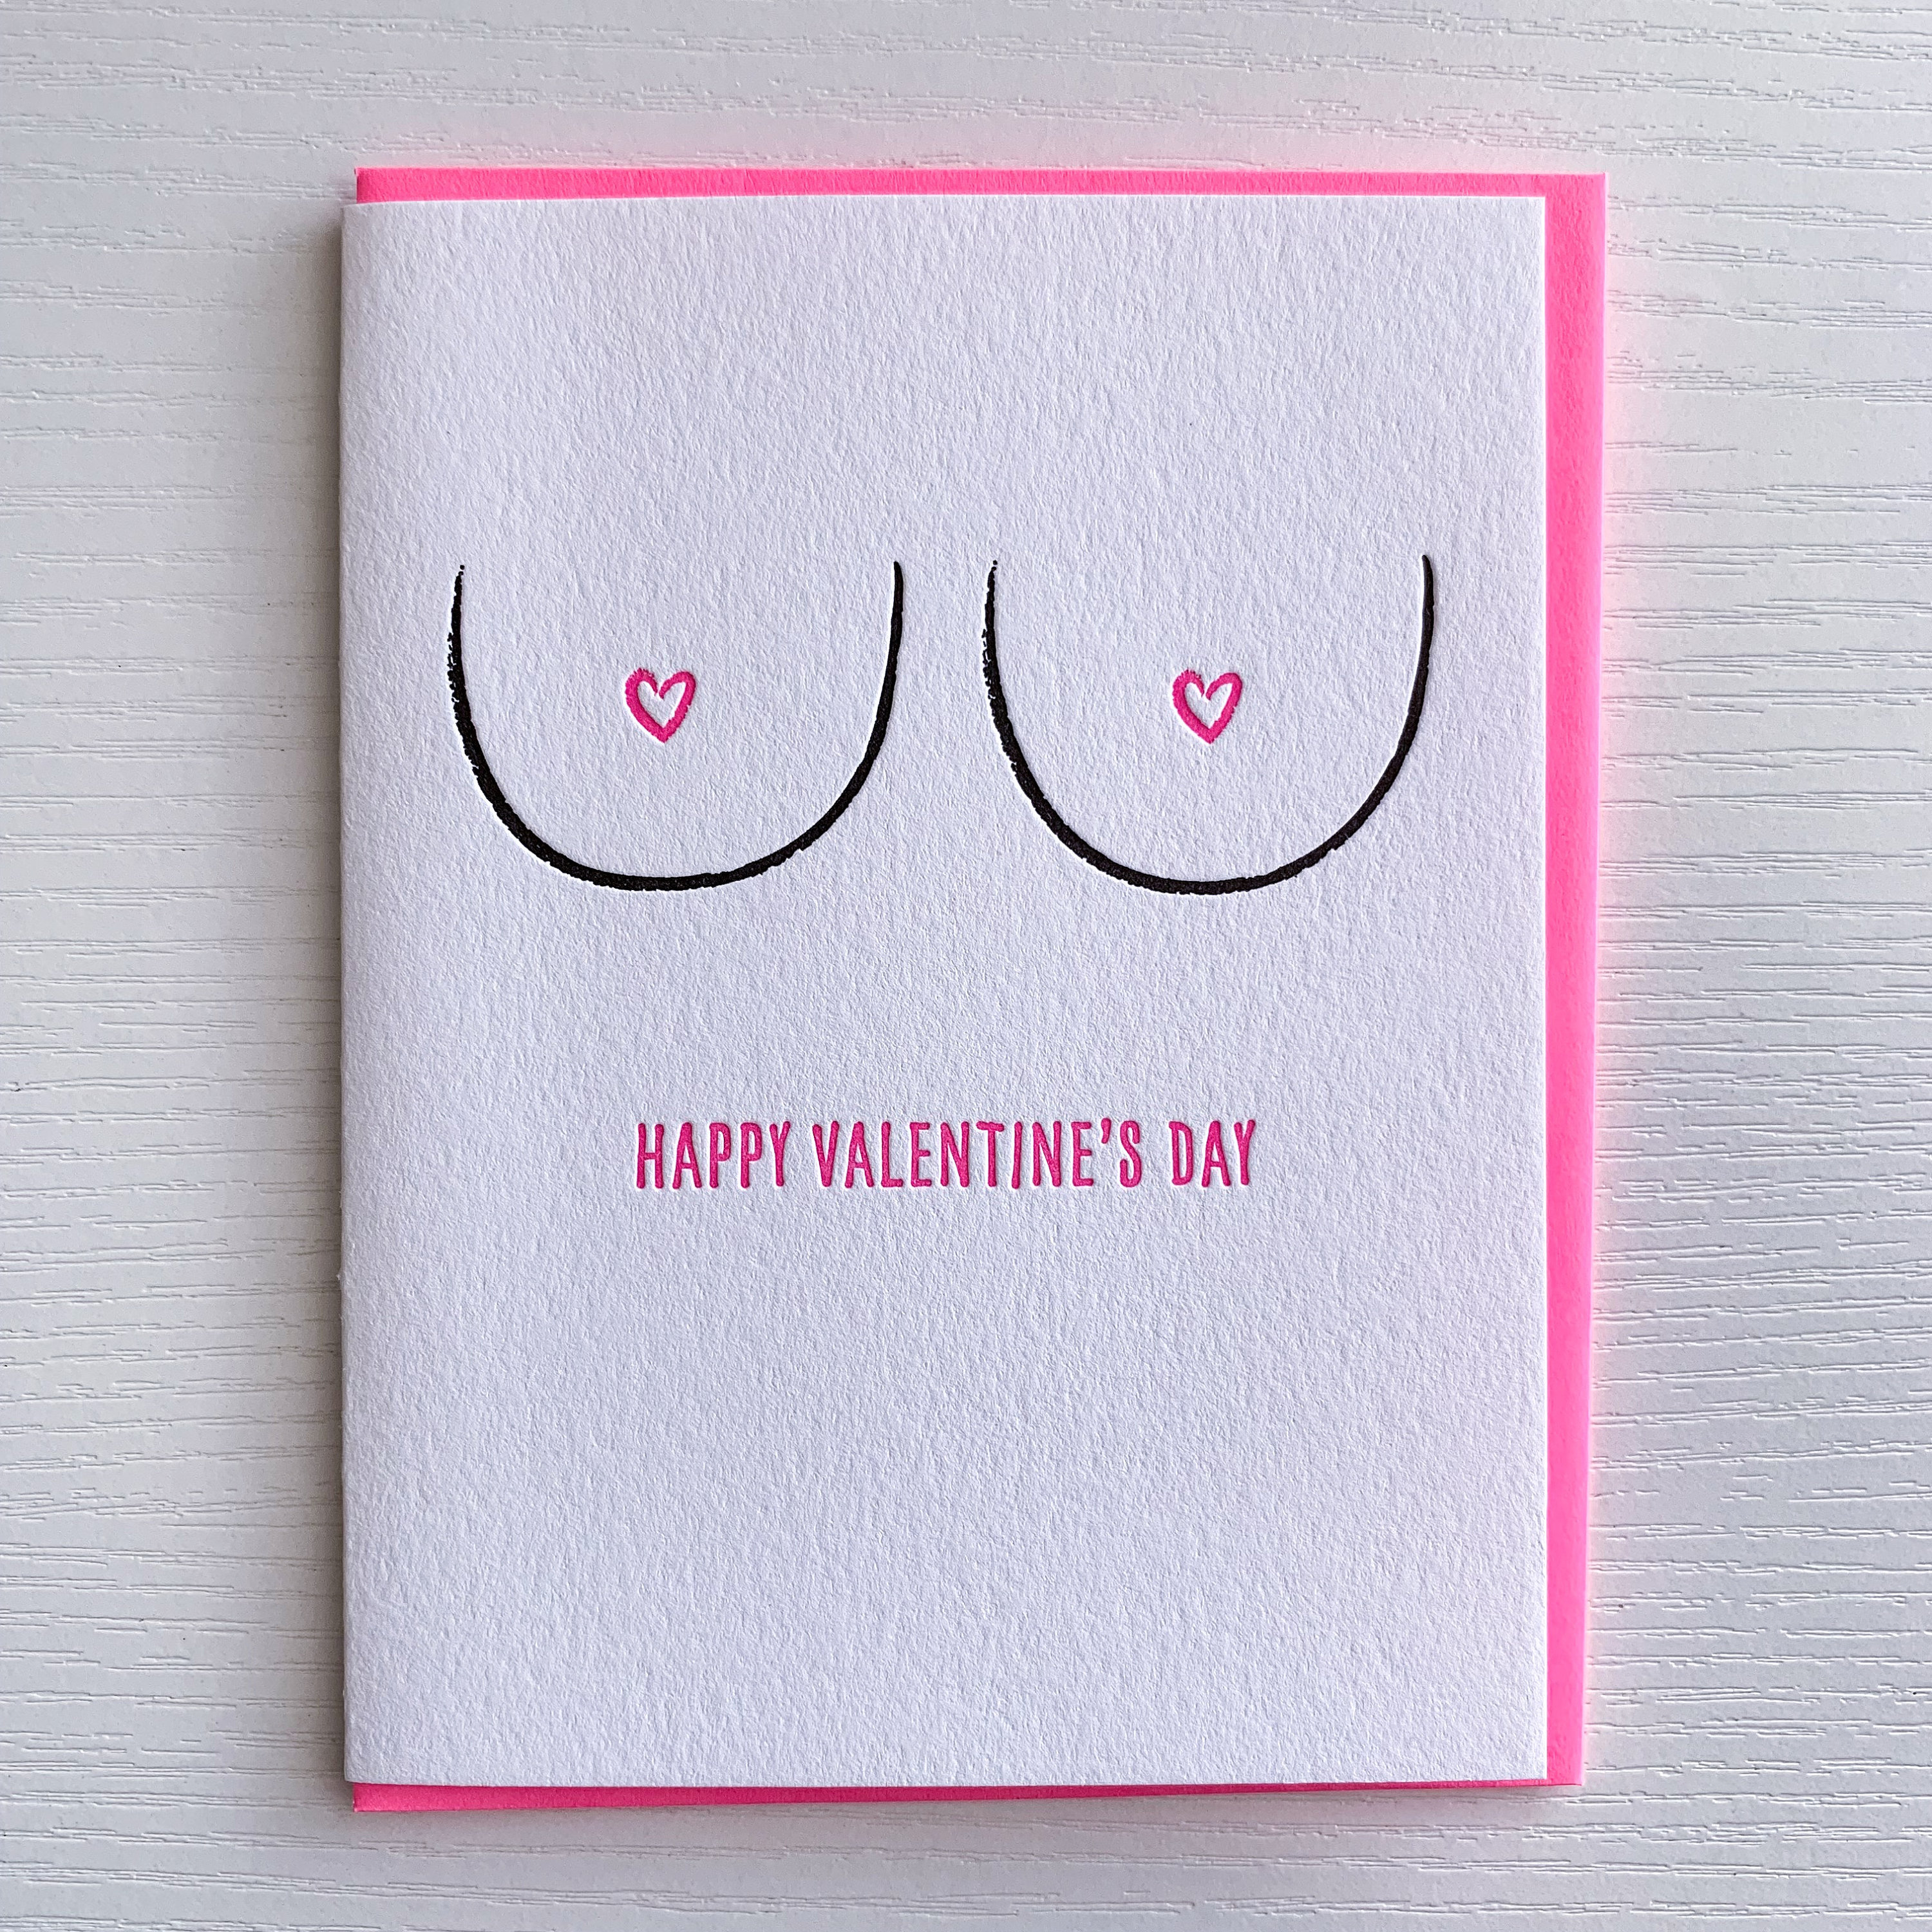 Cheeky Typography Valentine's Day Card / Anniversary Card - Boobs